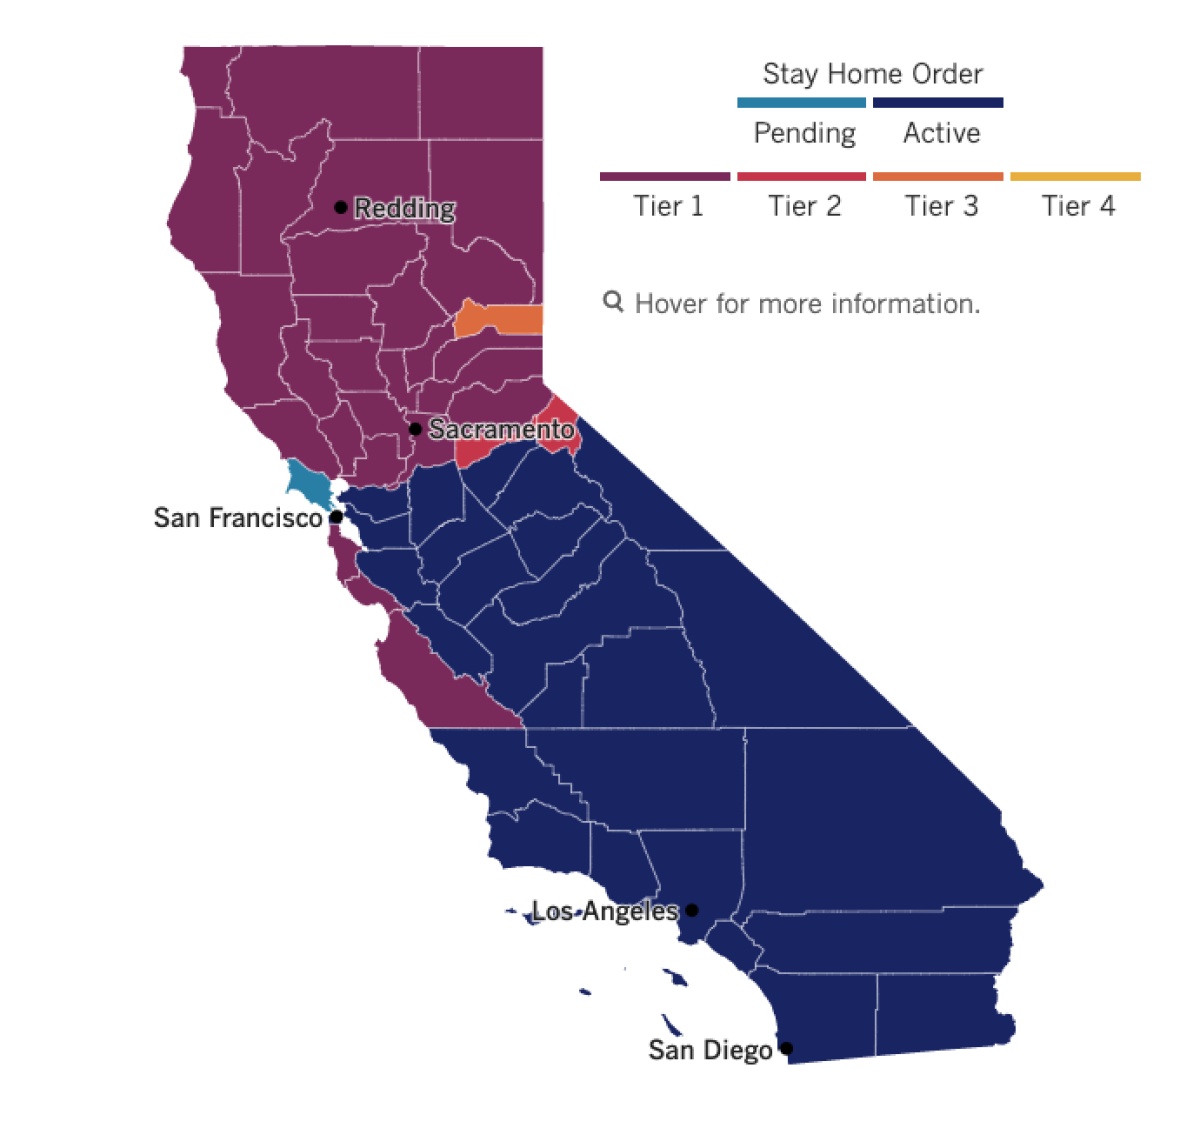 A map showing California counties' reopening status, with about half in the tiered system and half under stay-at-home order.